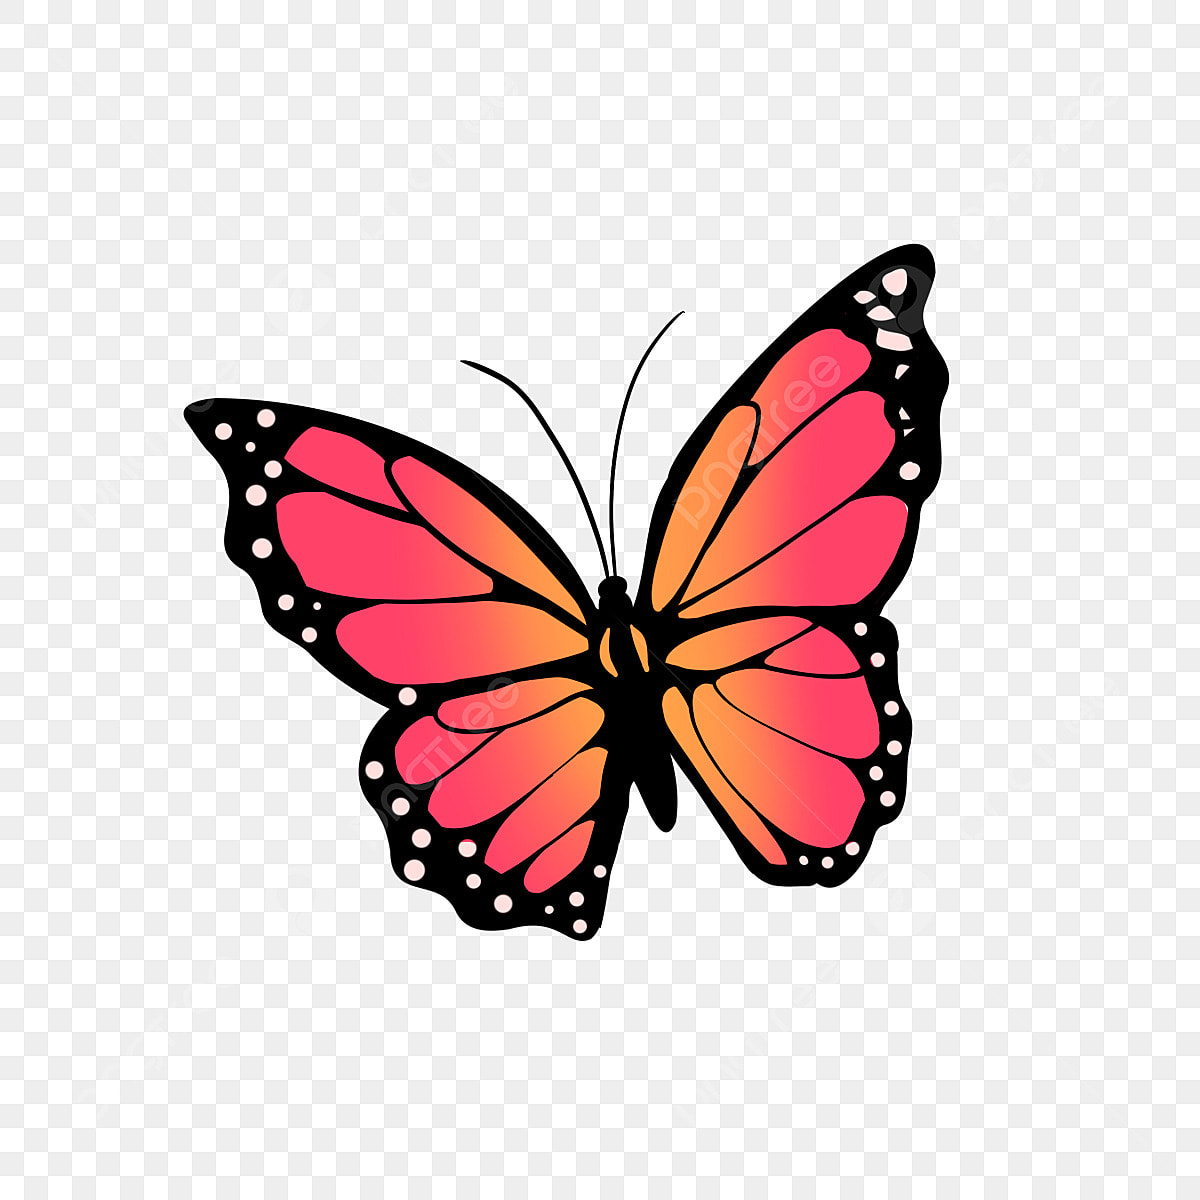 Monarch Butterfly PNG Transparent Image Free Download